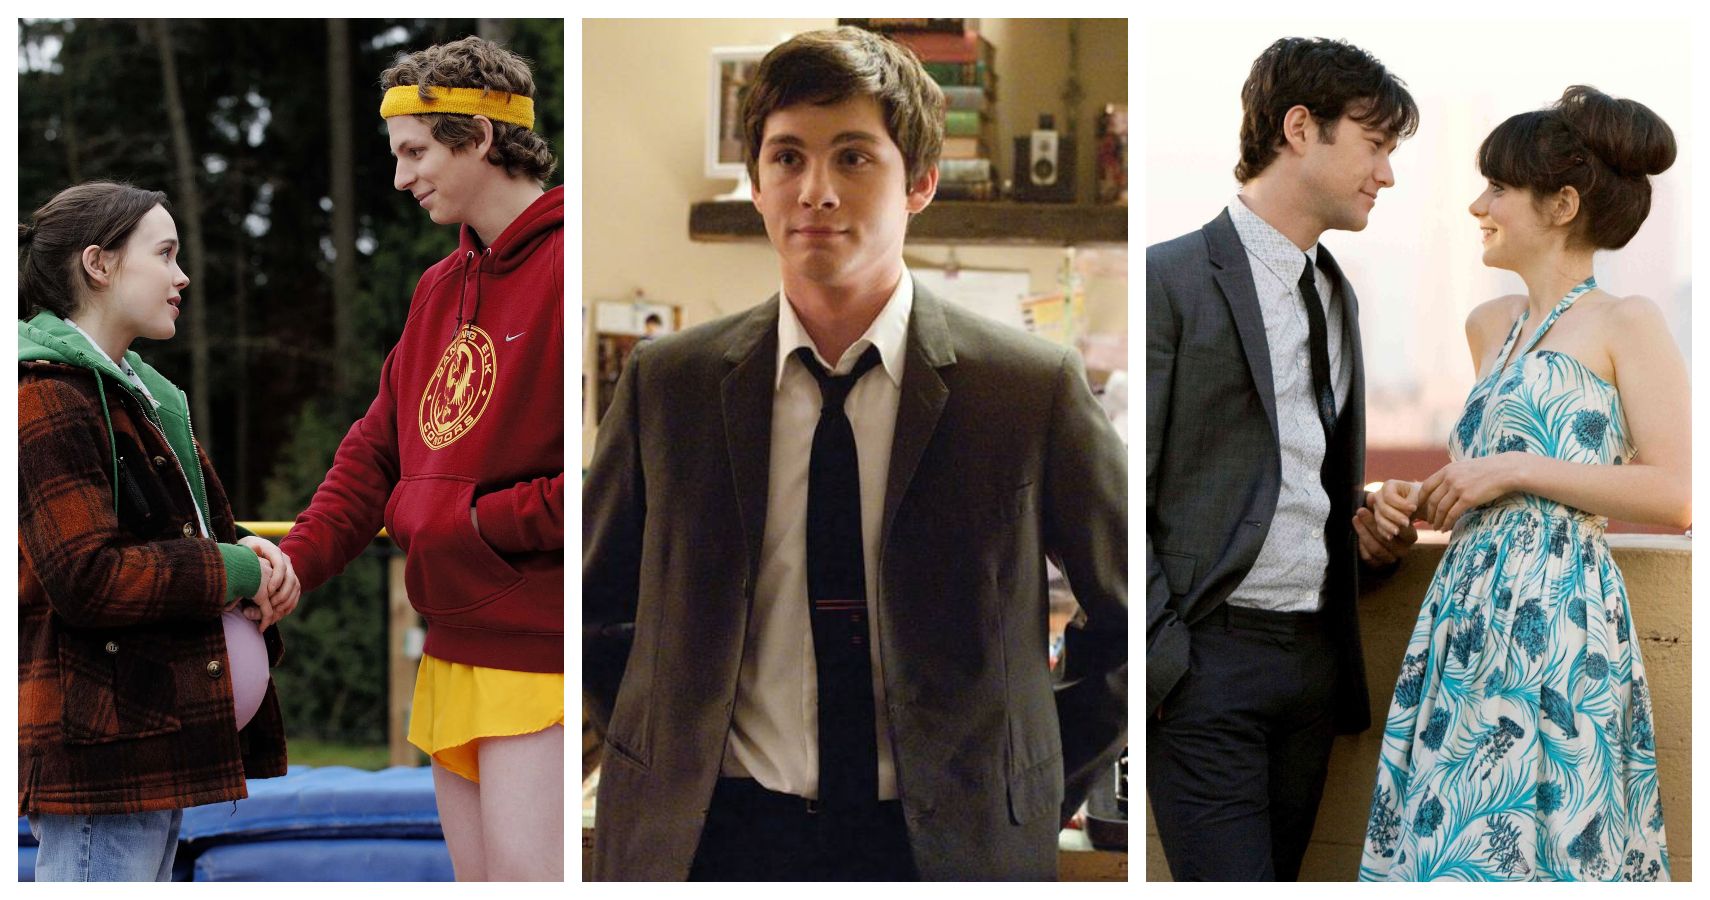 Perks Of Being A Wallflower: Trailers, Reviews and Cast